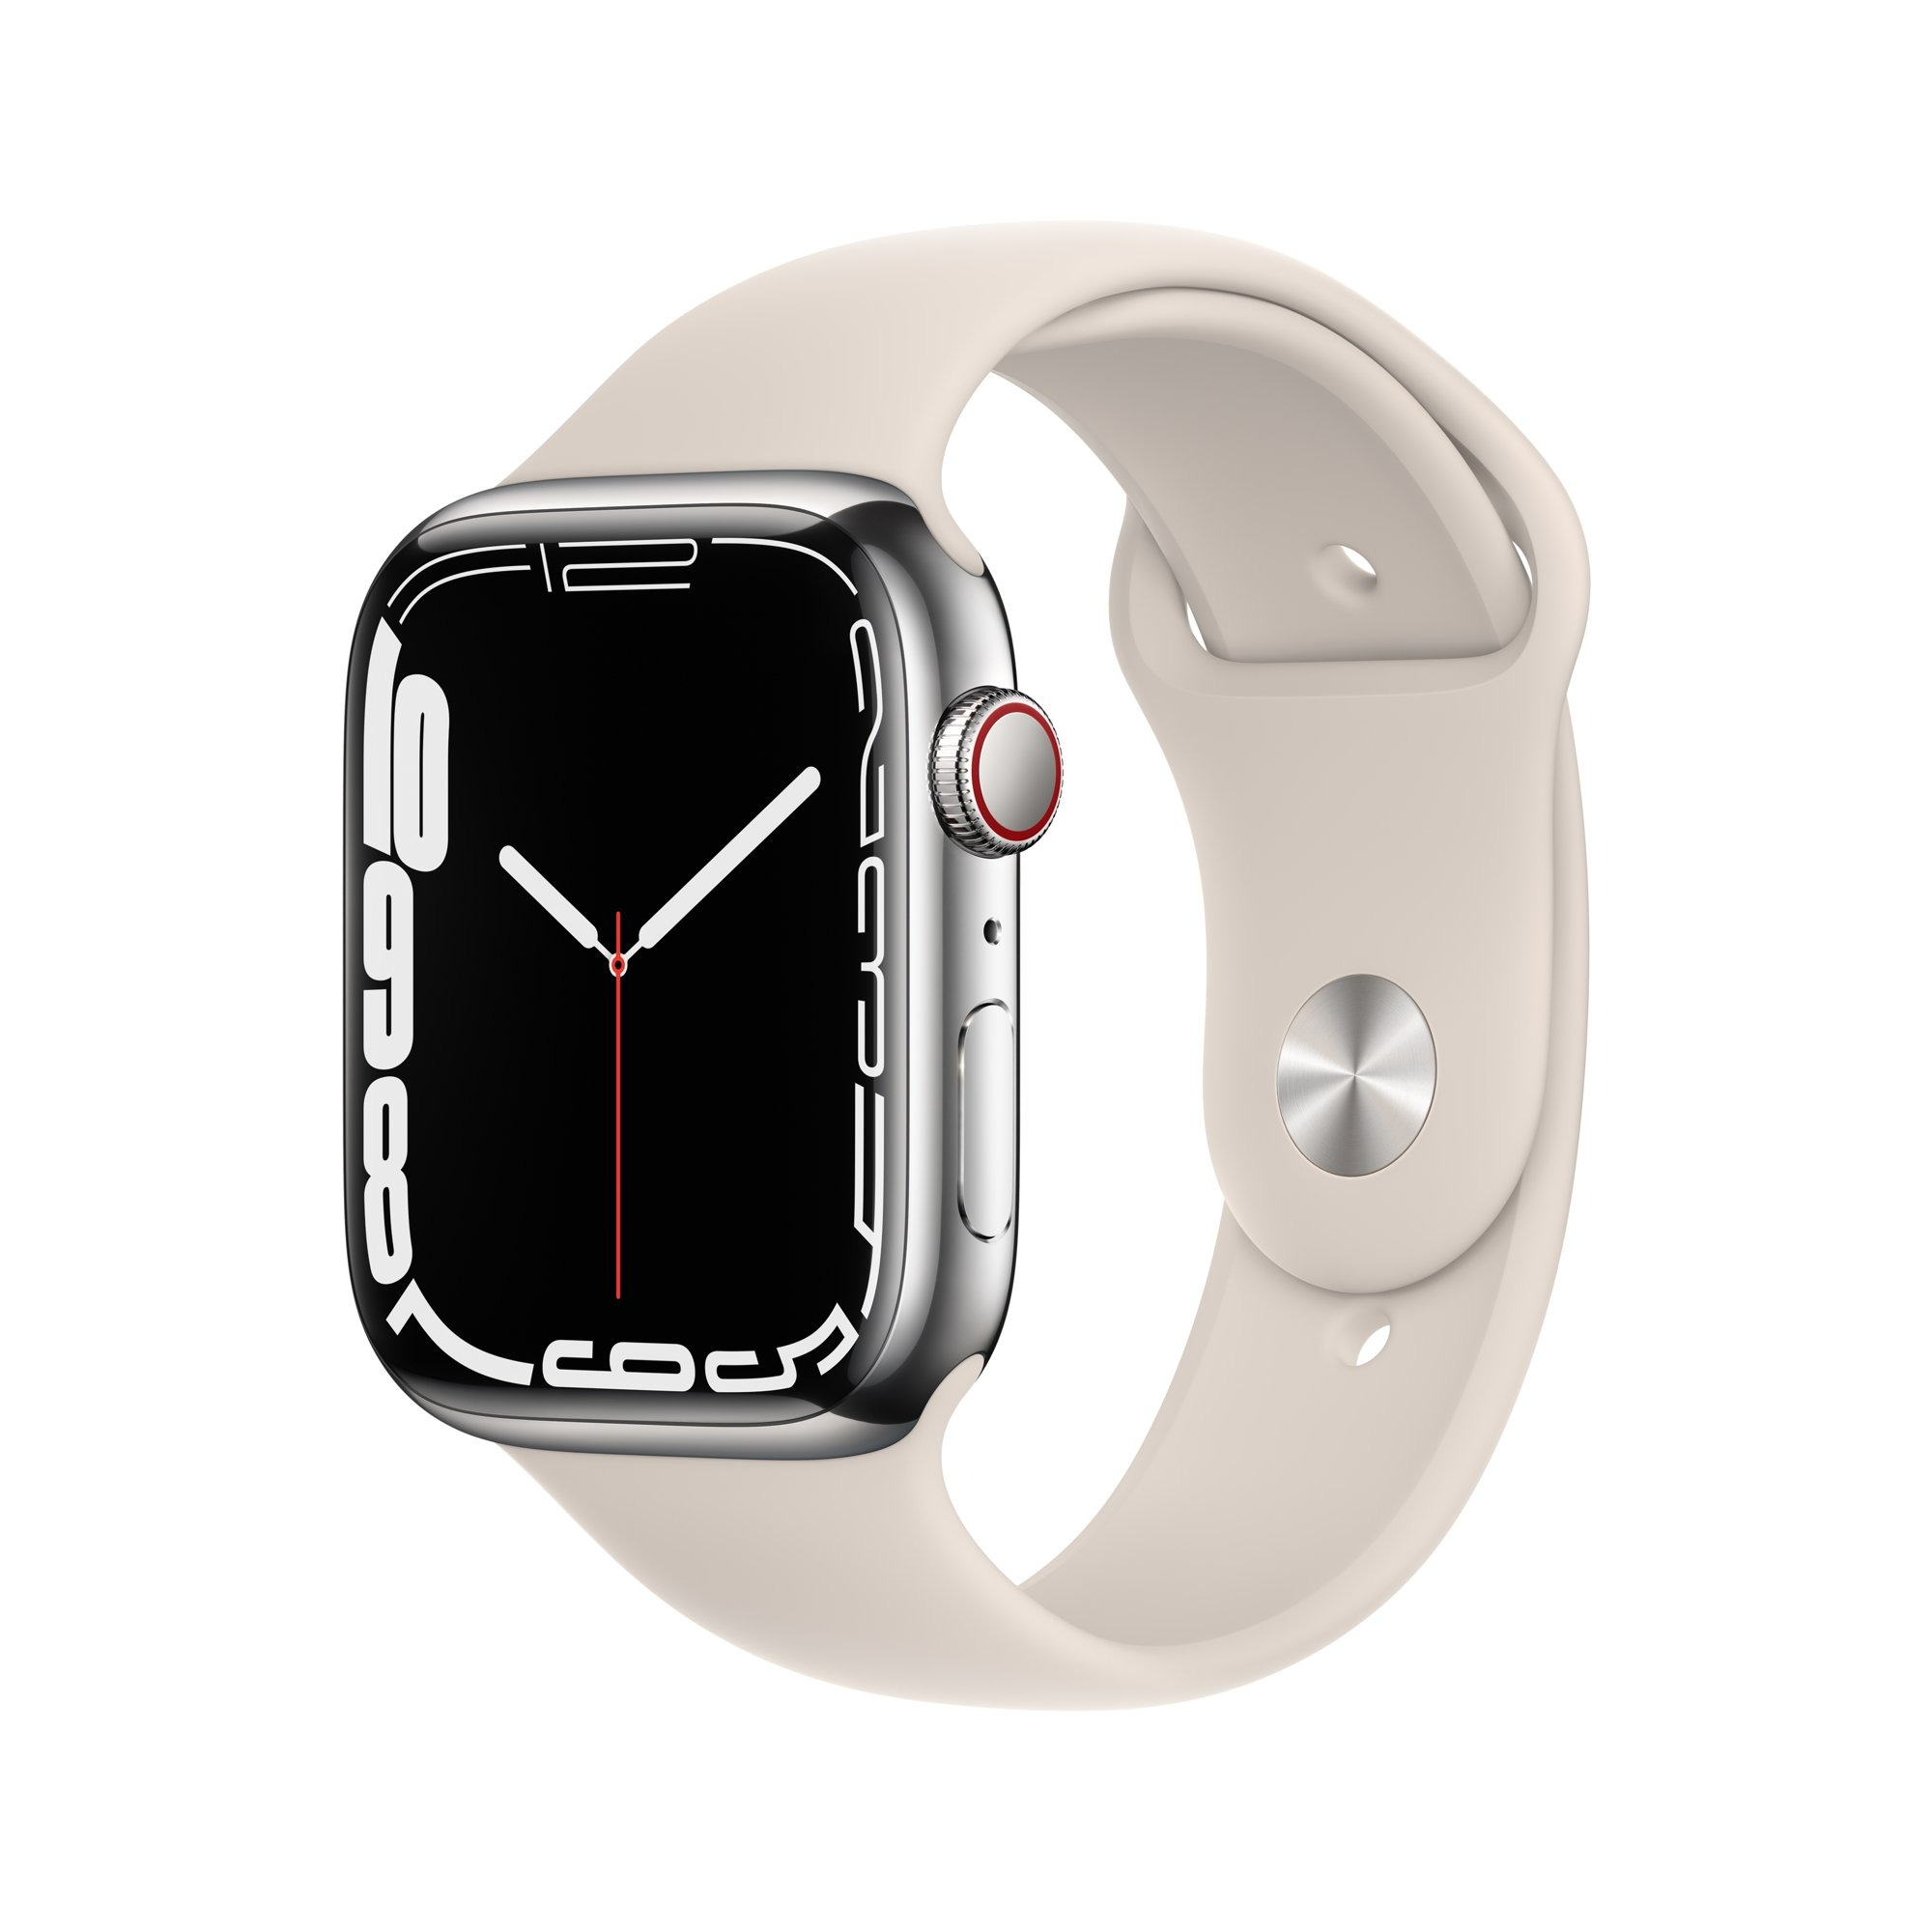 Apple Watch Series 7 45mm Silver Stainless Steel [GPS+Cellular] w/Starlight Sport Band $622.14